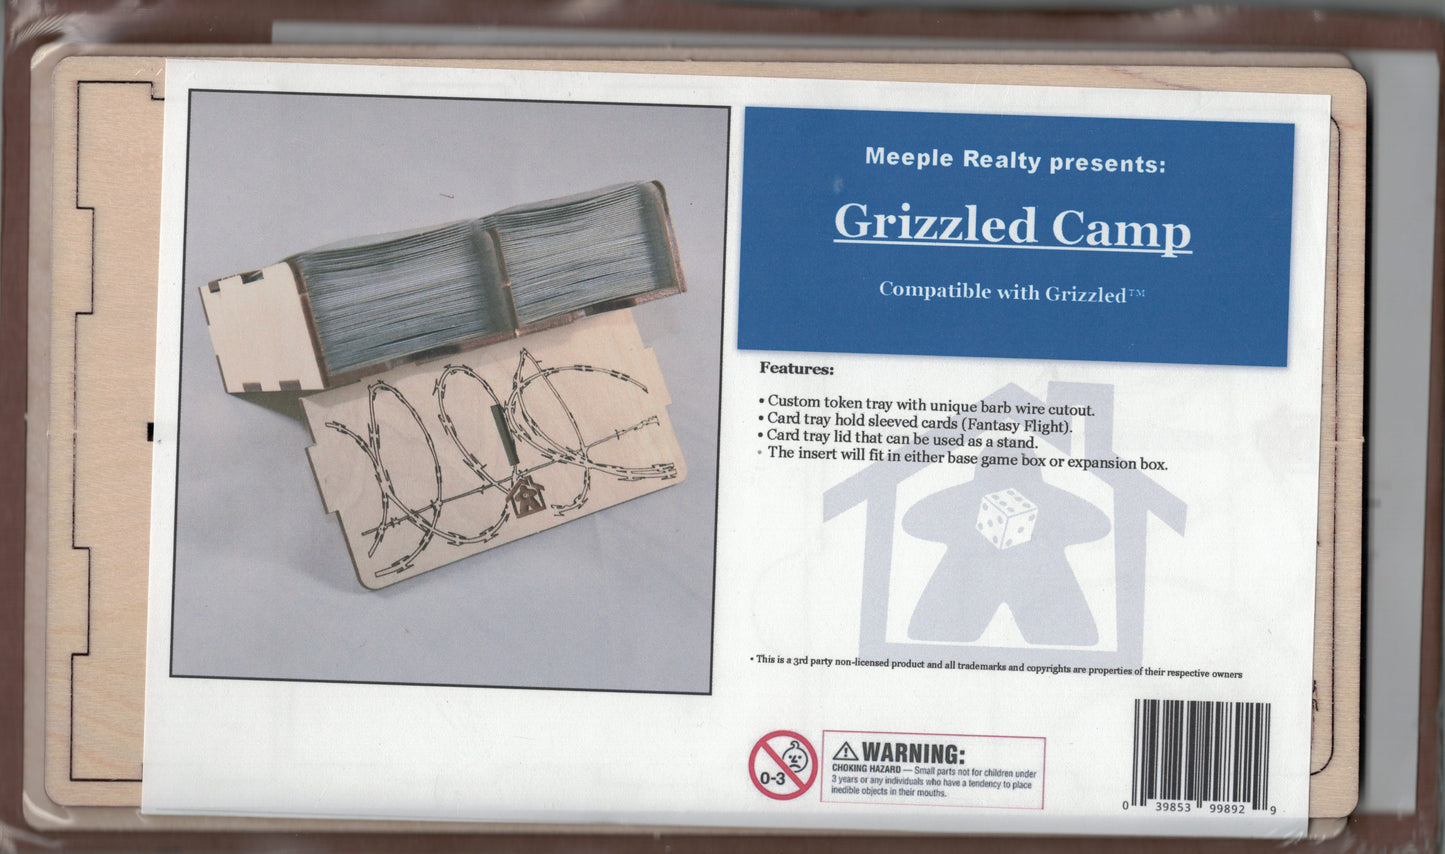 Grizzled Camp box insert